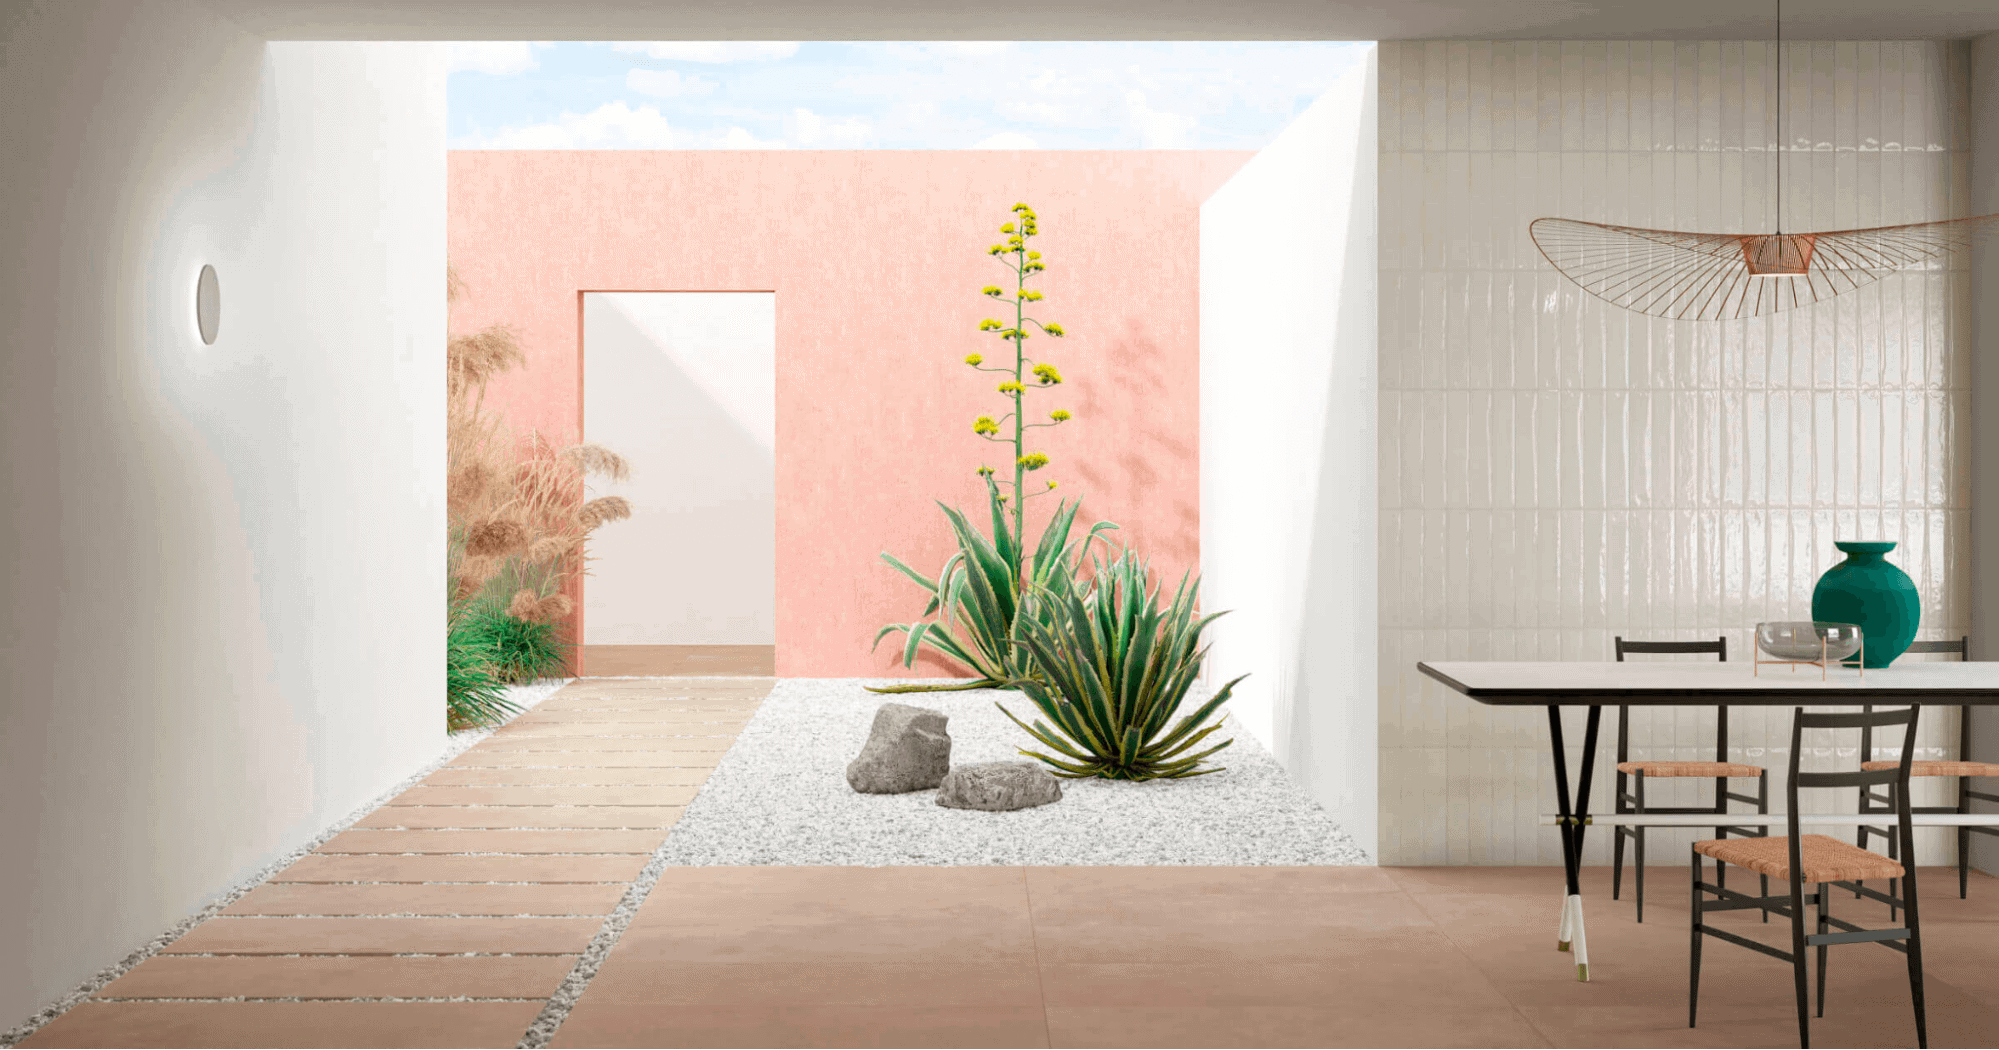 Porcelain pavers for a contemporary, terracotta look with a lighter and more pinkish walls